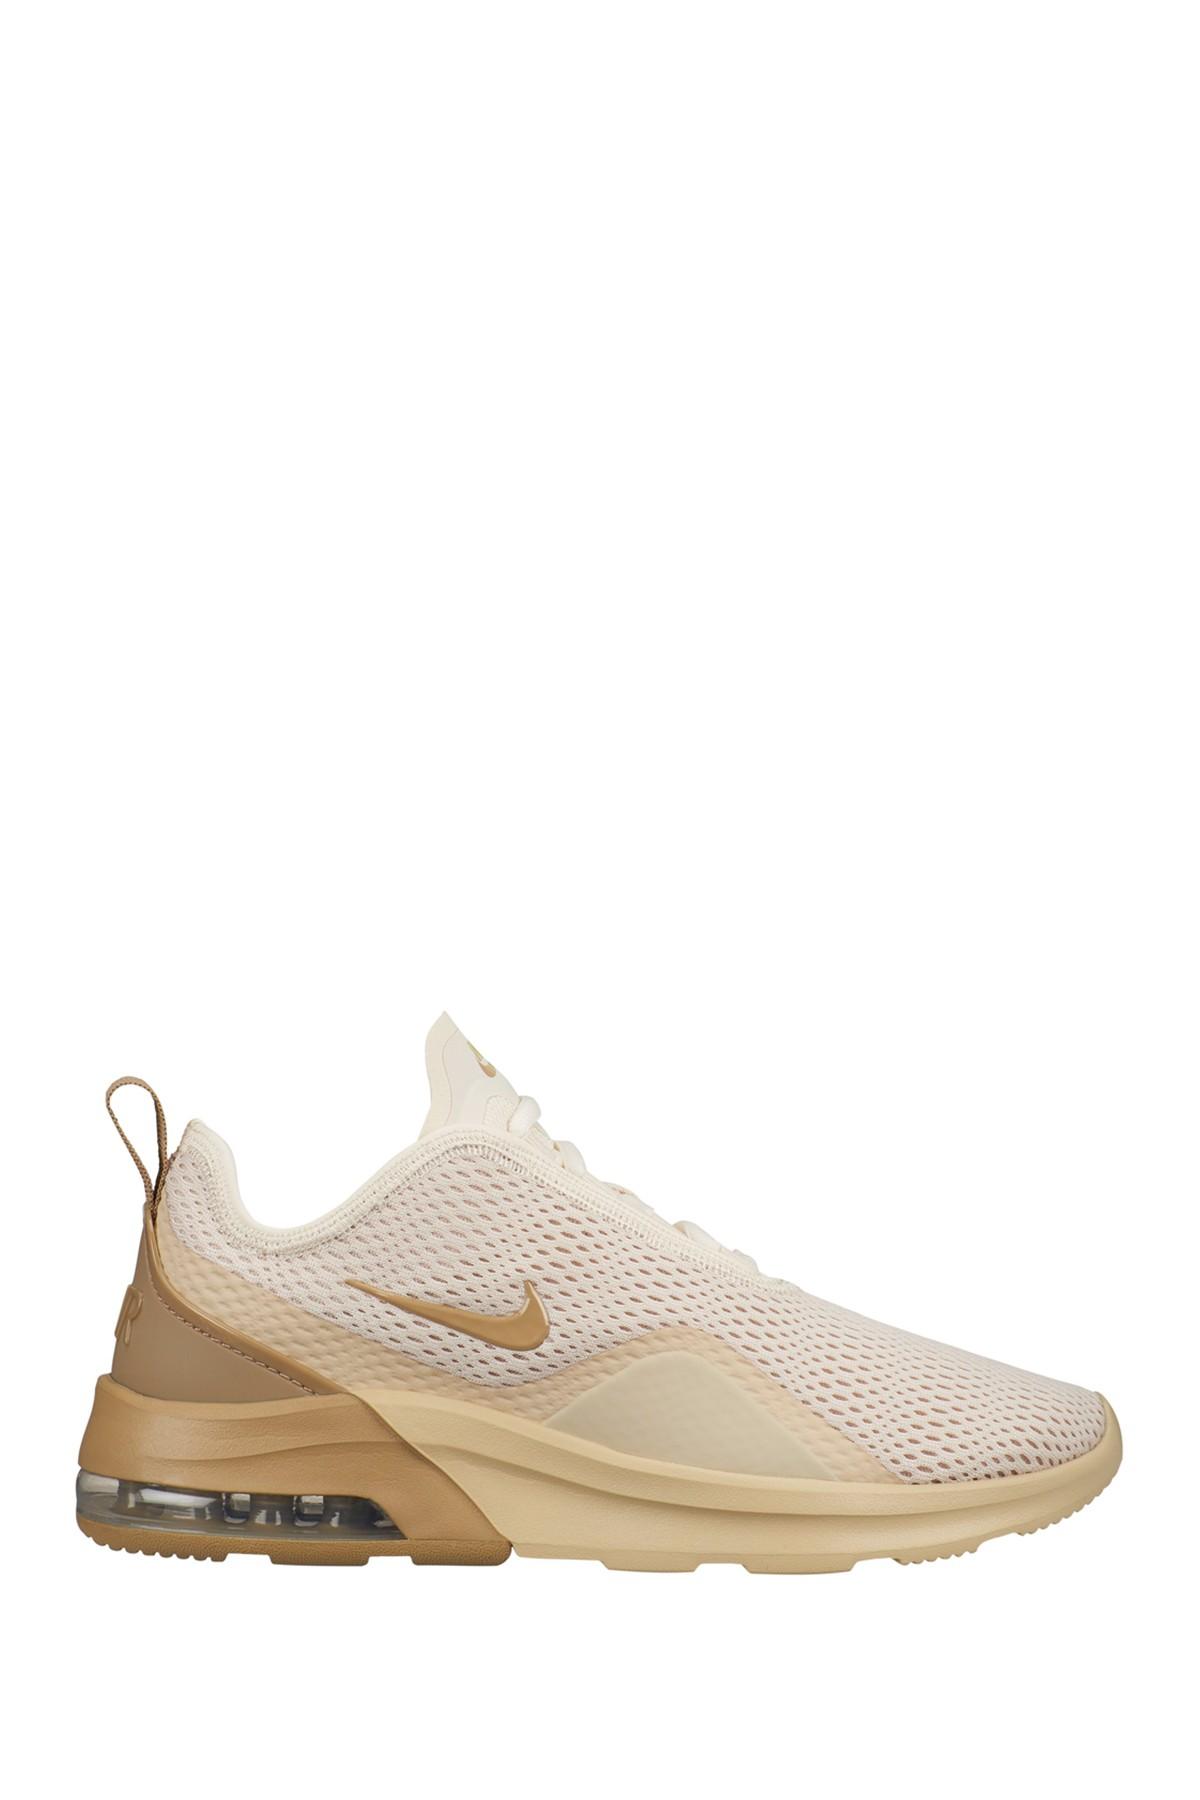 Nike Synthetic Air Max Motion 2 Shoes in Cream/Gold (Natural) | Lyst نظارات شمسية ماركات